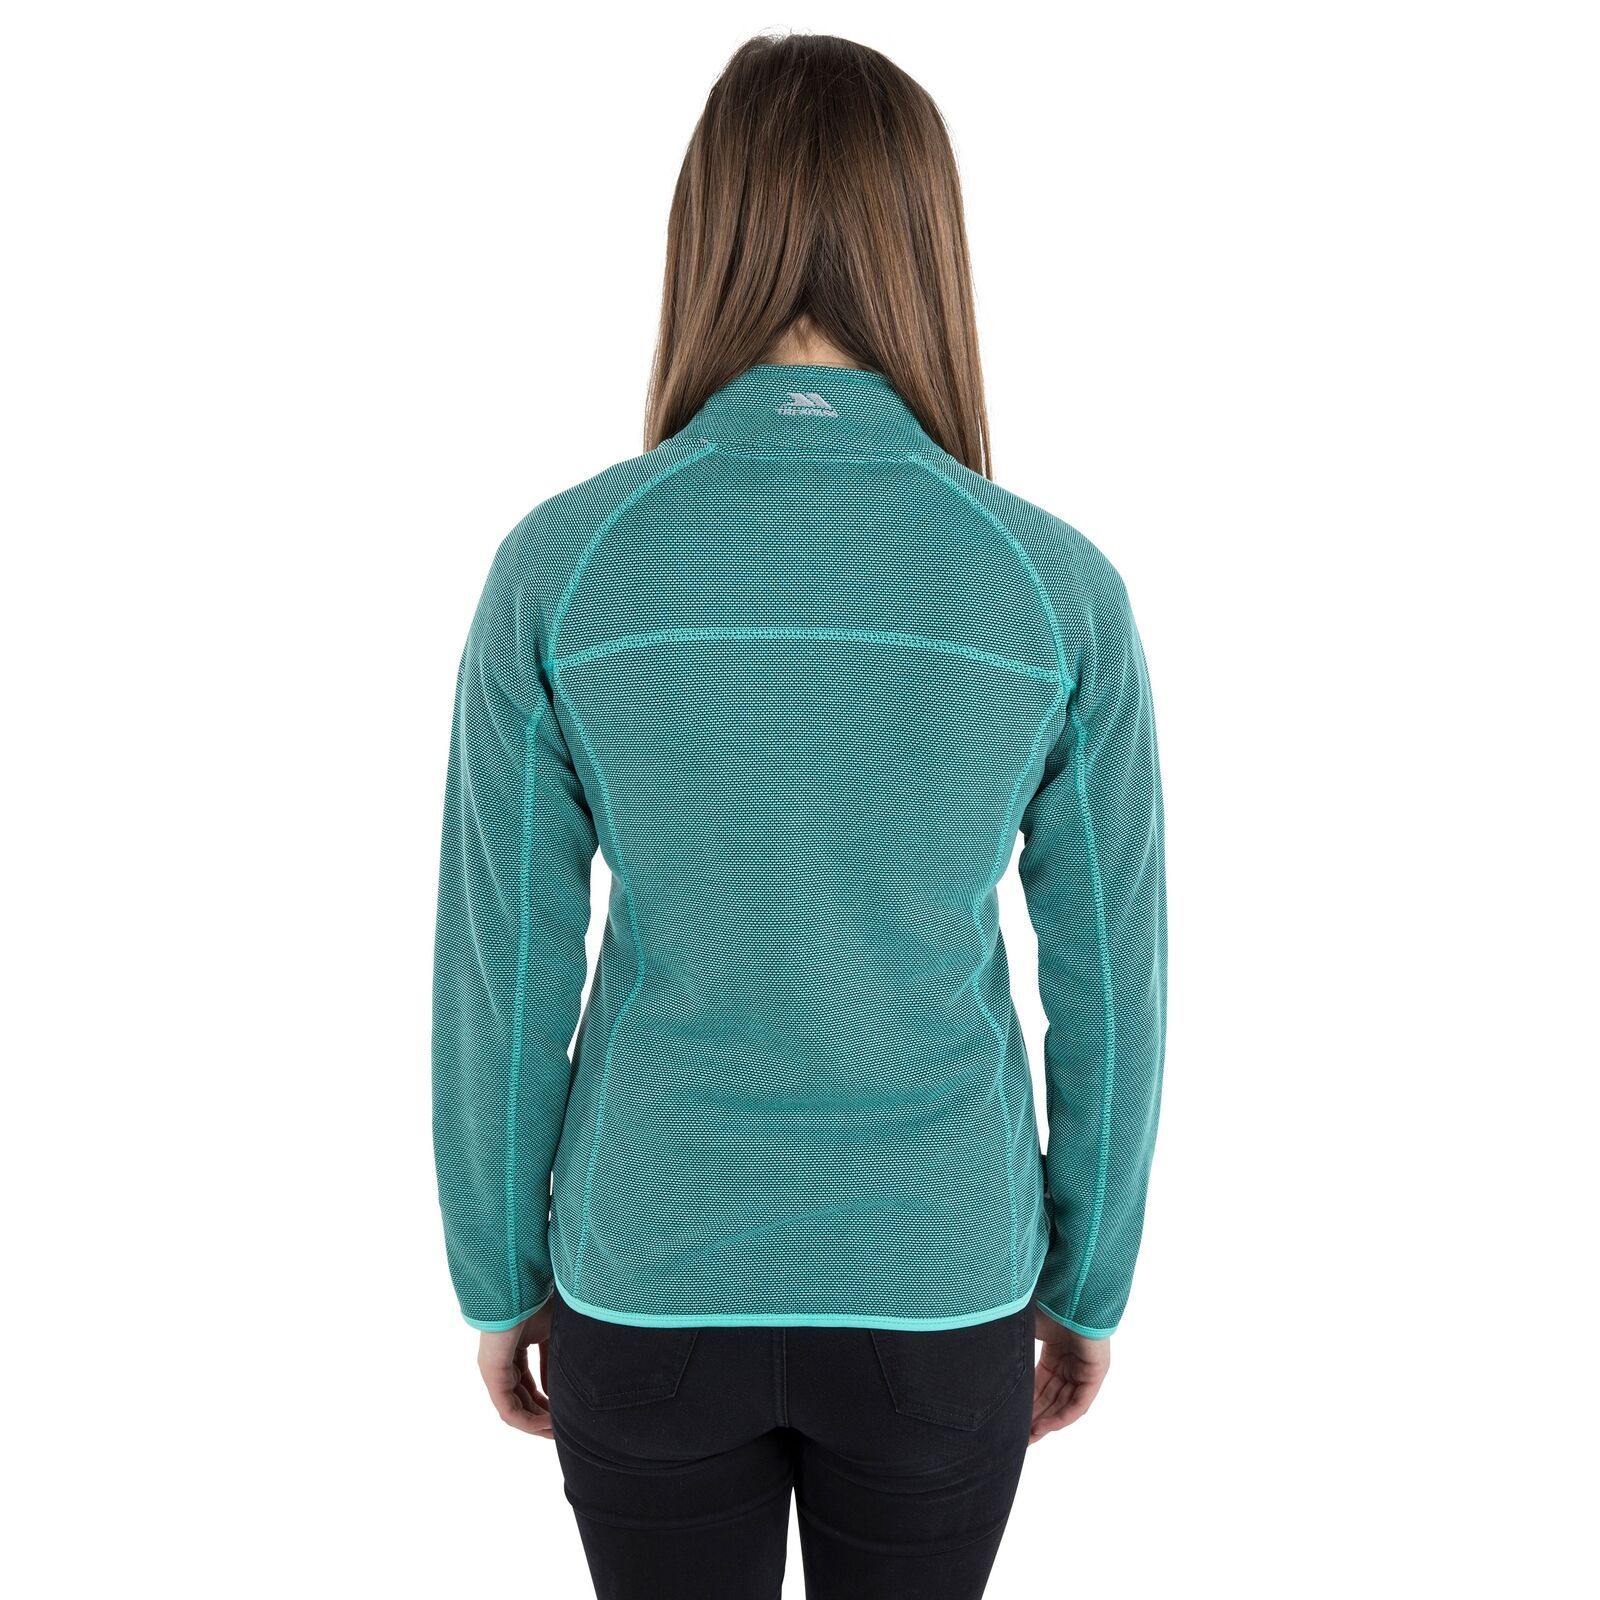 Womens patterned bonded fleece. Coverstitch detail. 2 zip pockets. Stretch binding at cuffs and hem. 100% polyester.